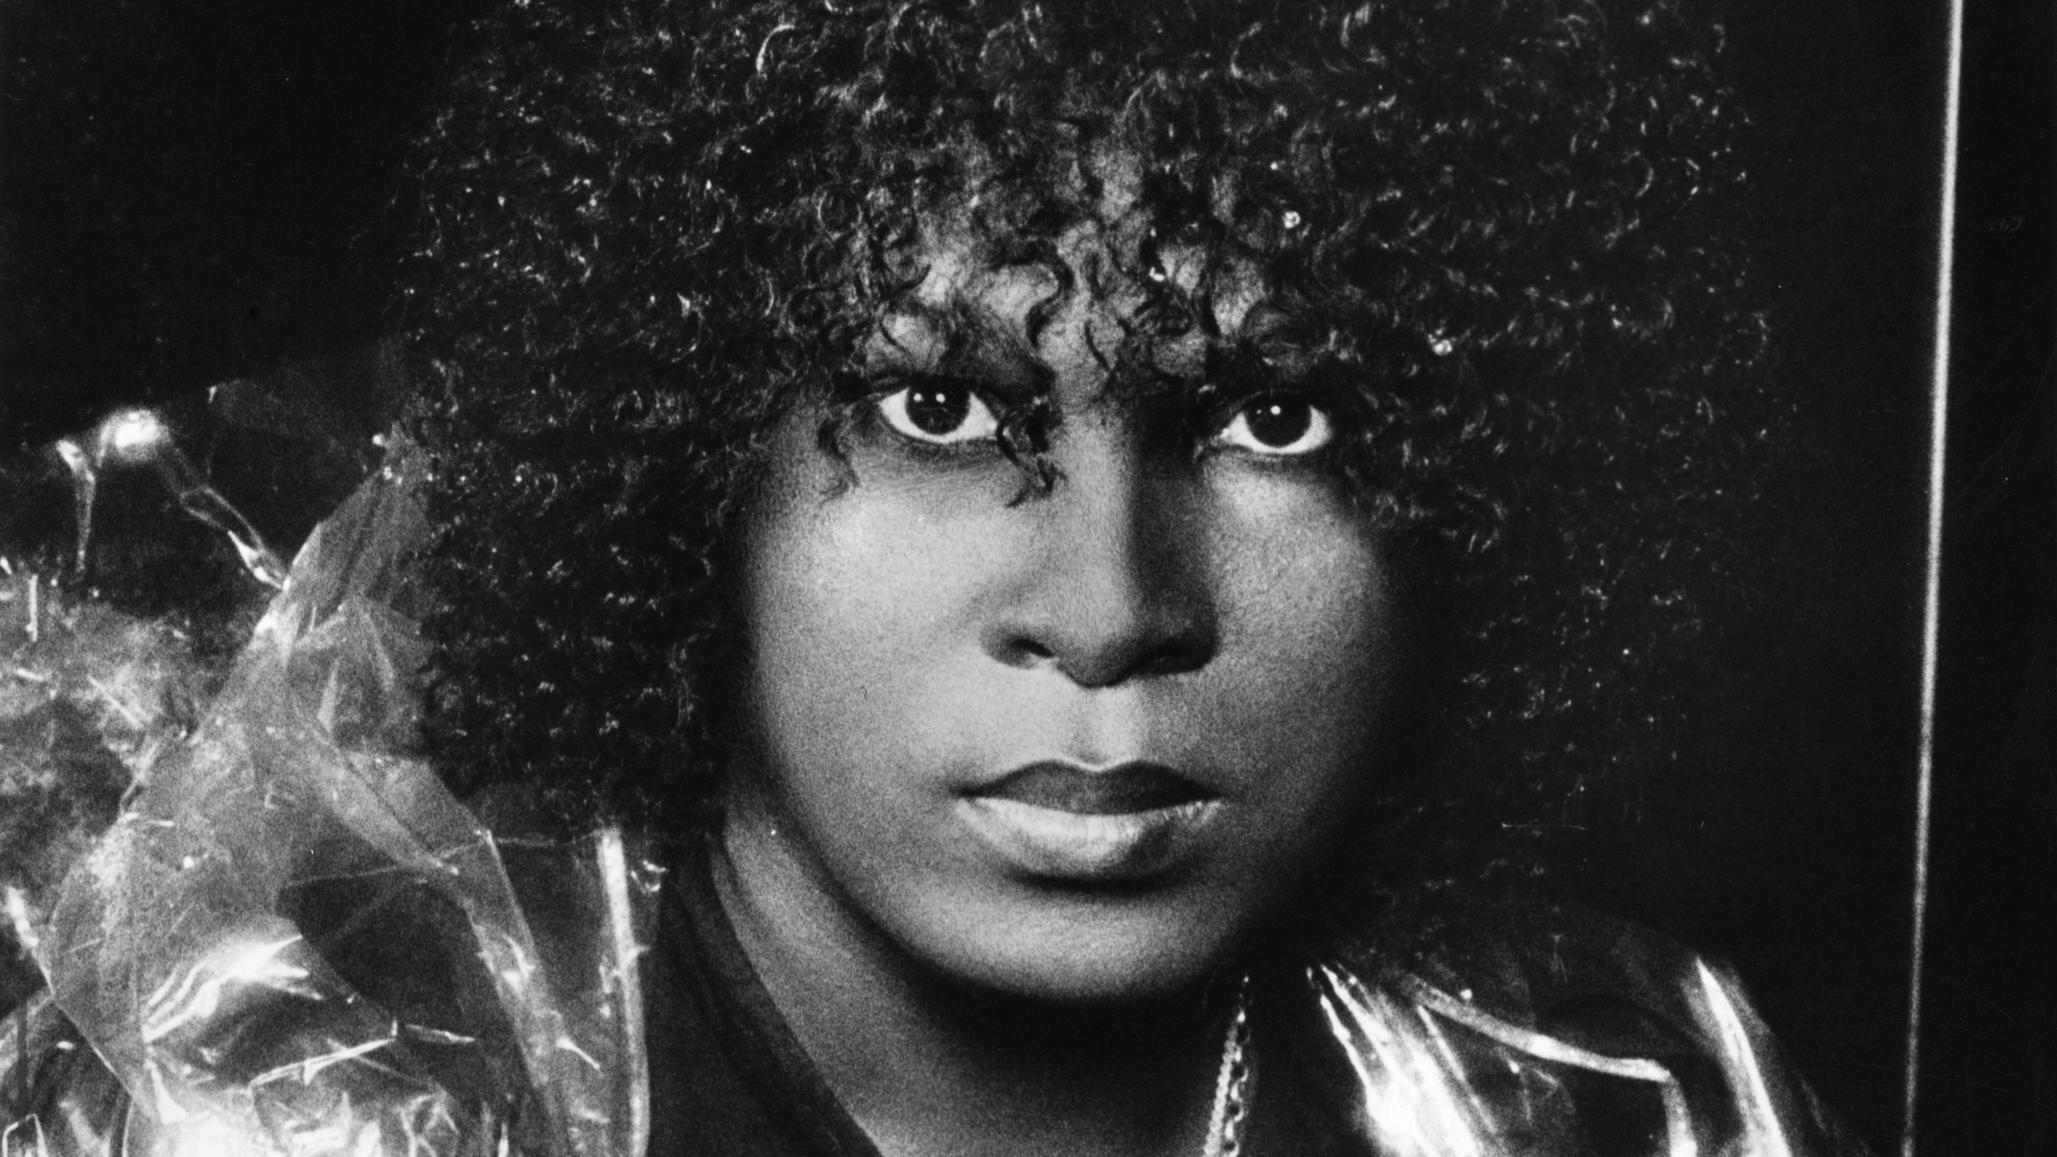 CIRCA 1978: Disco singer Sylvester aka Sylvester James poses for a portrait in circa 1978. (Photo by Michael Ochs Archives/Getty Images)